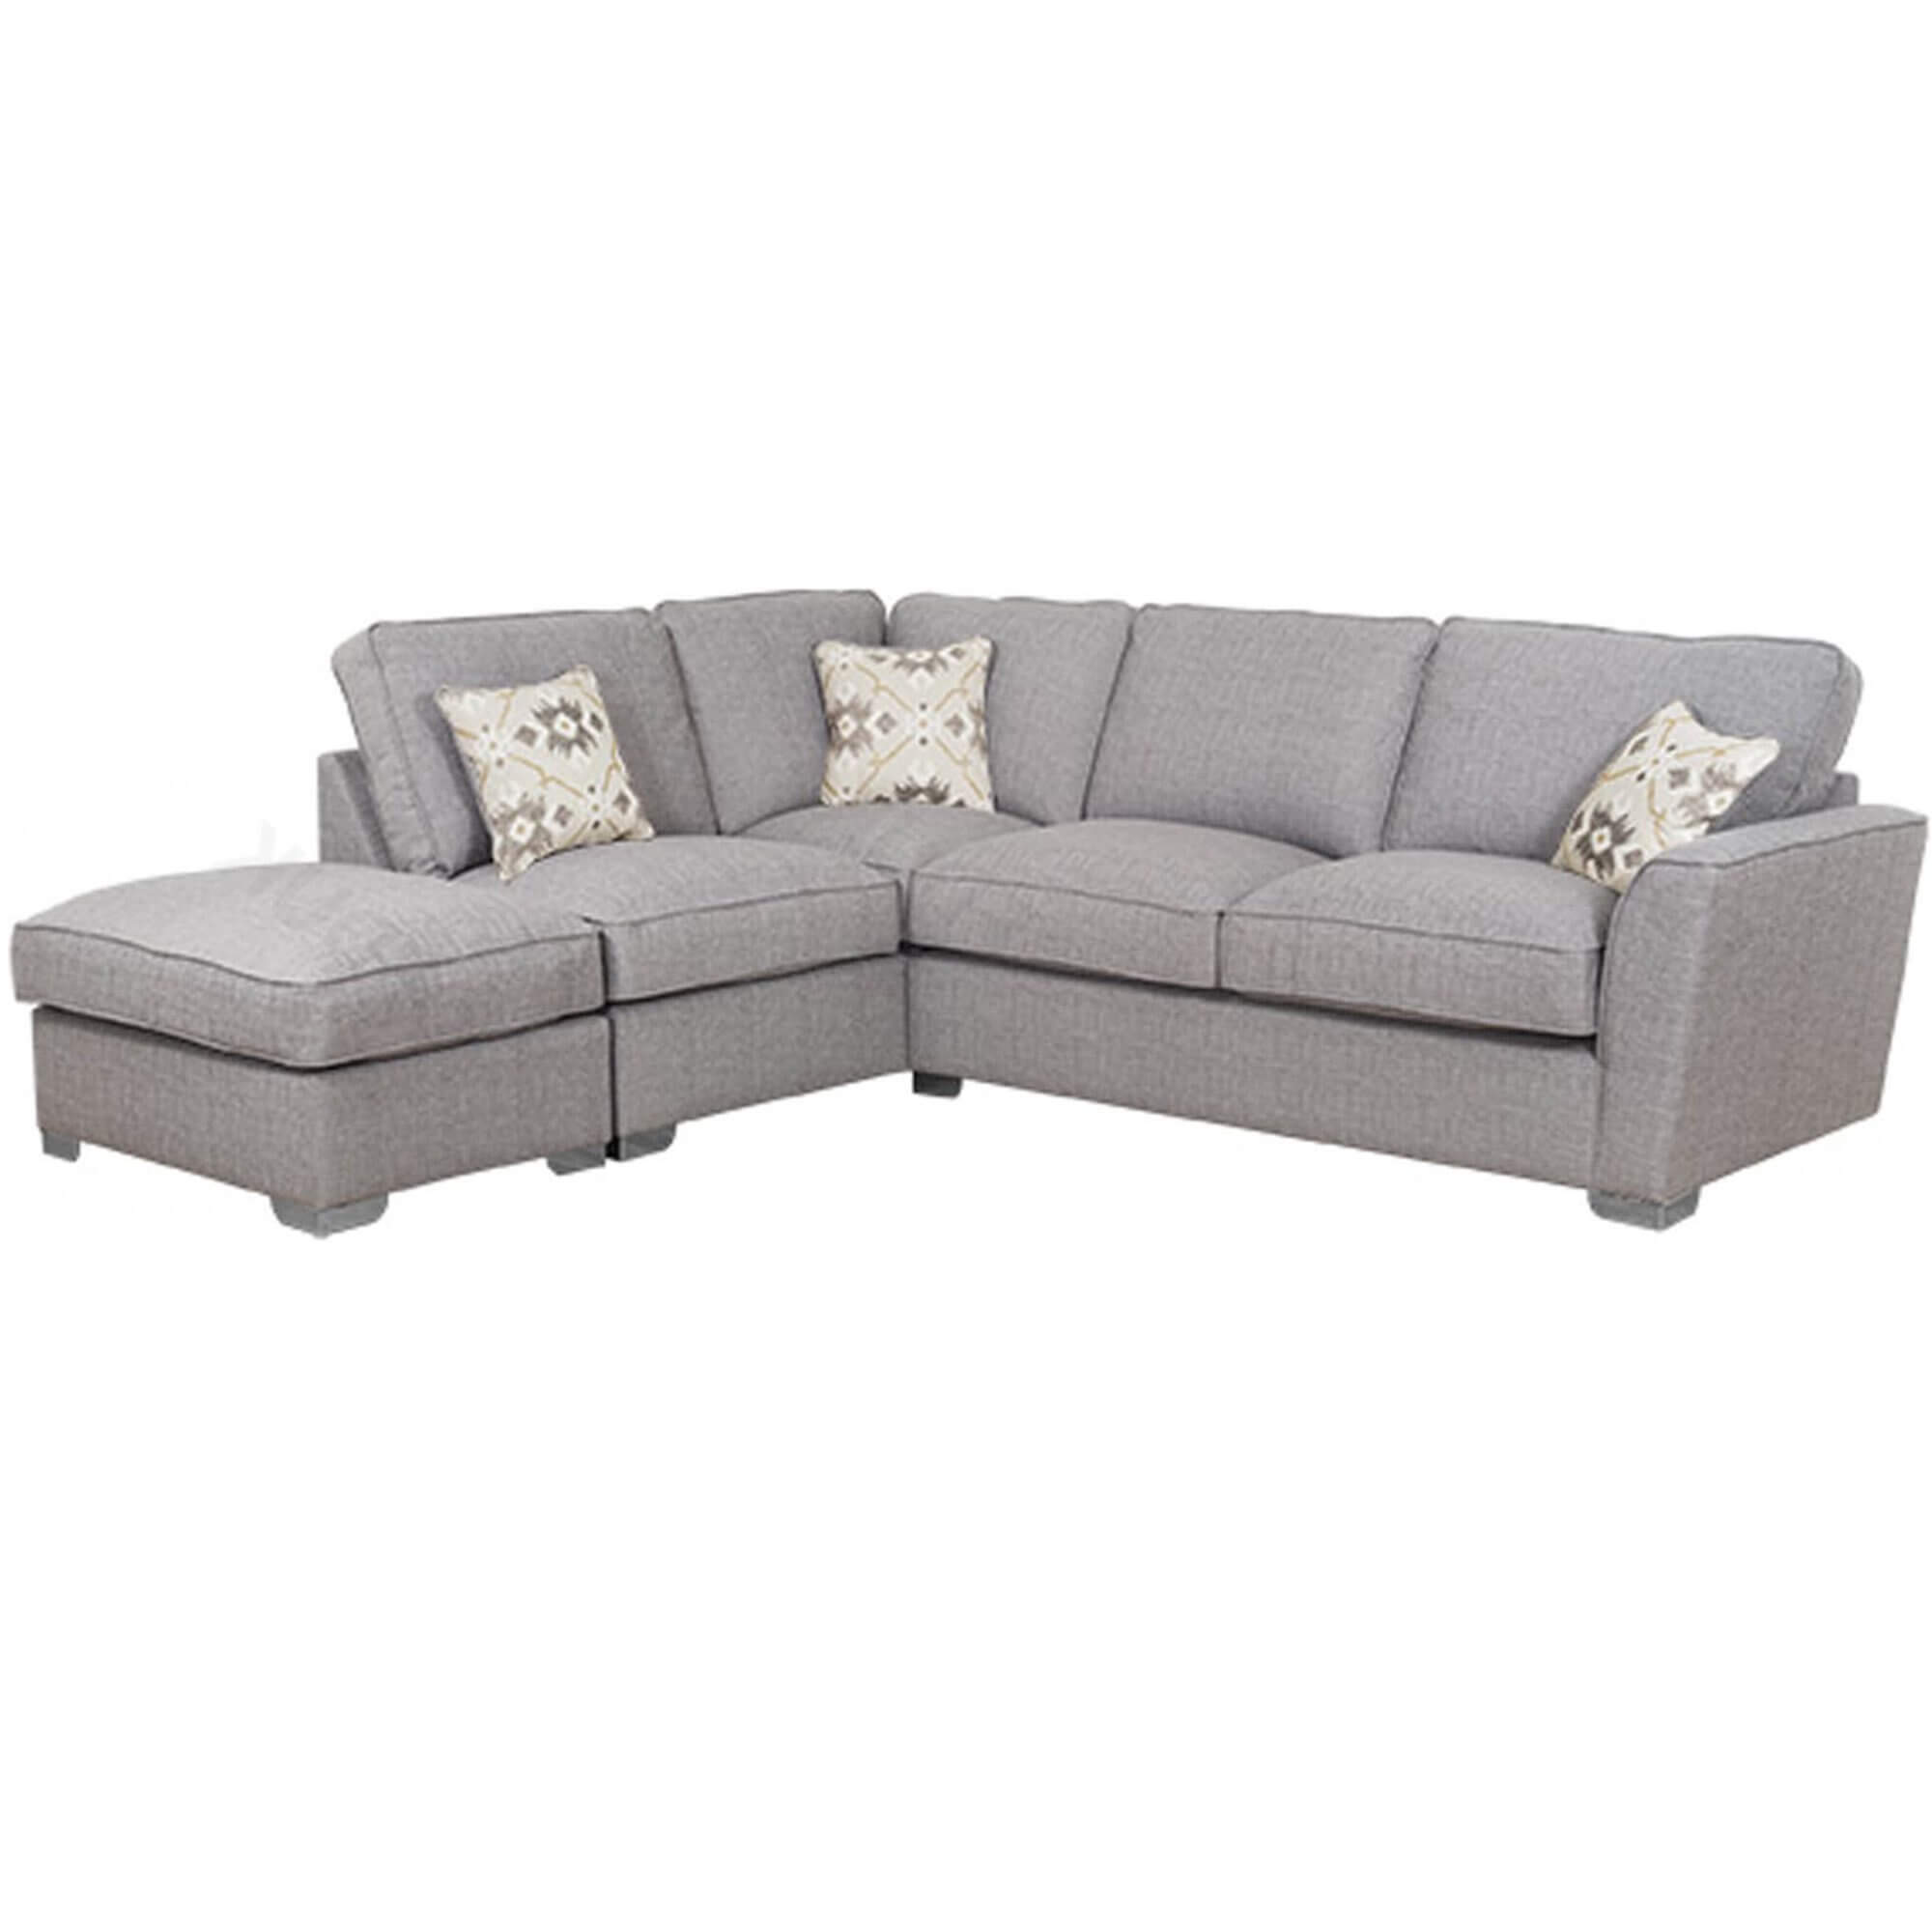 Showing image for Washington right chaise sofa bed + footstool